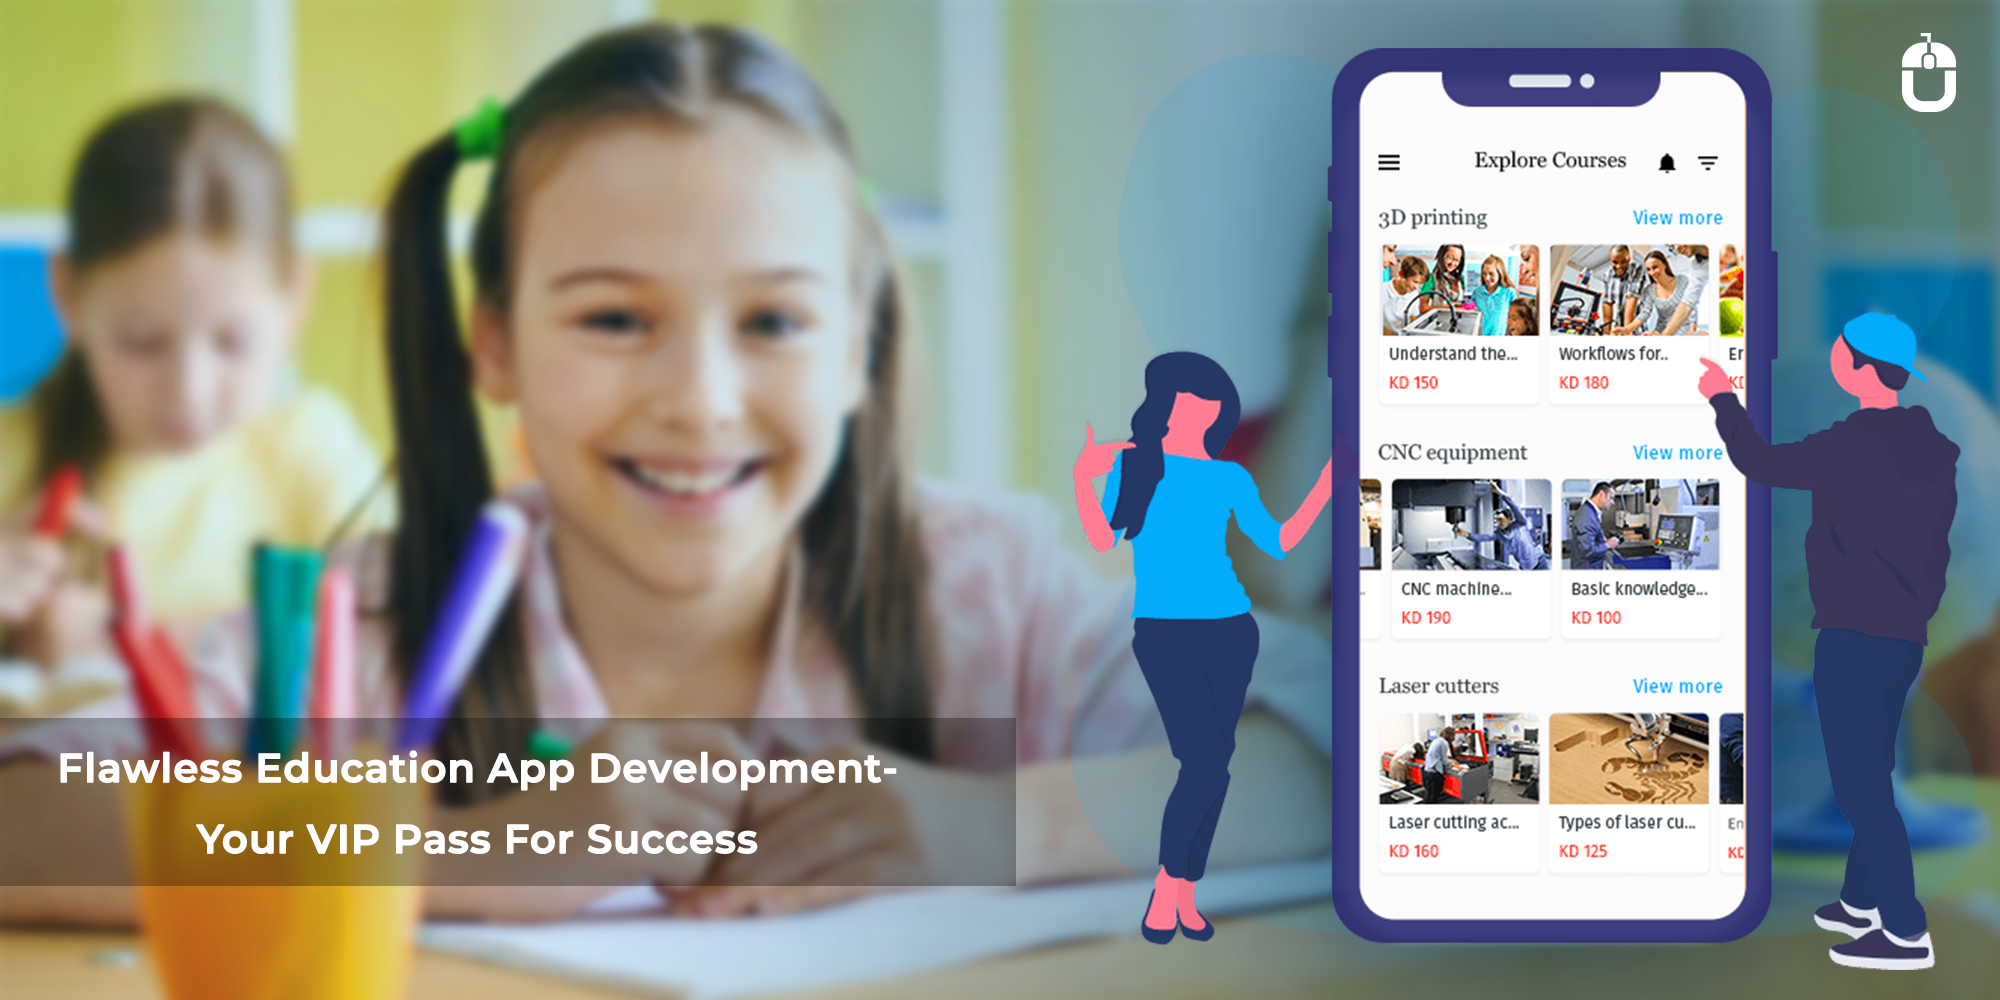 Flawless Education App Development – Your VIP Pass For Success